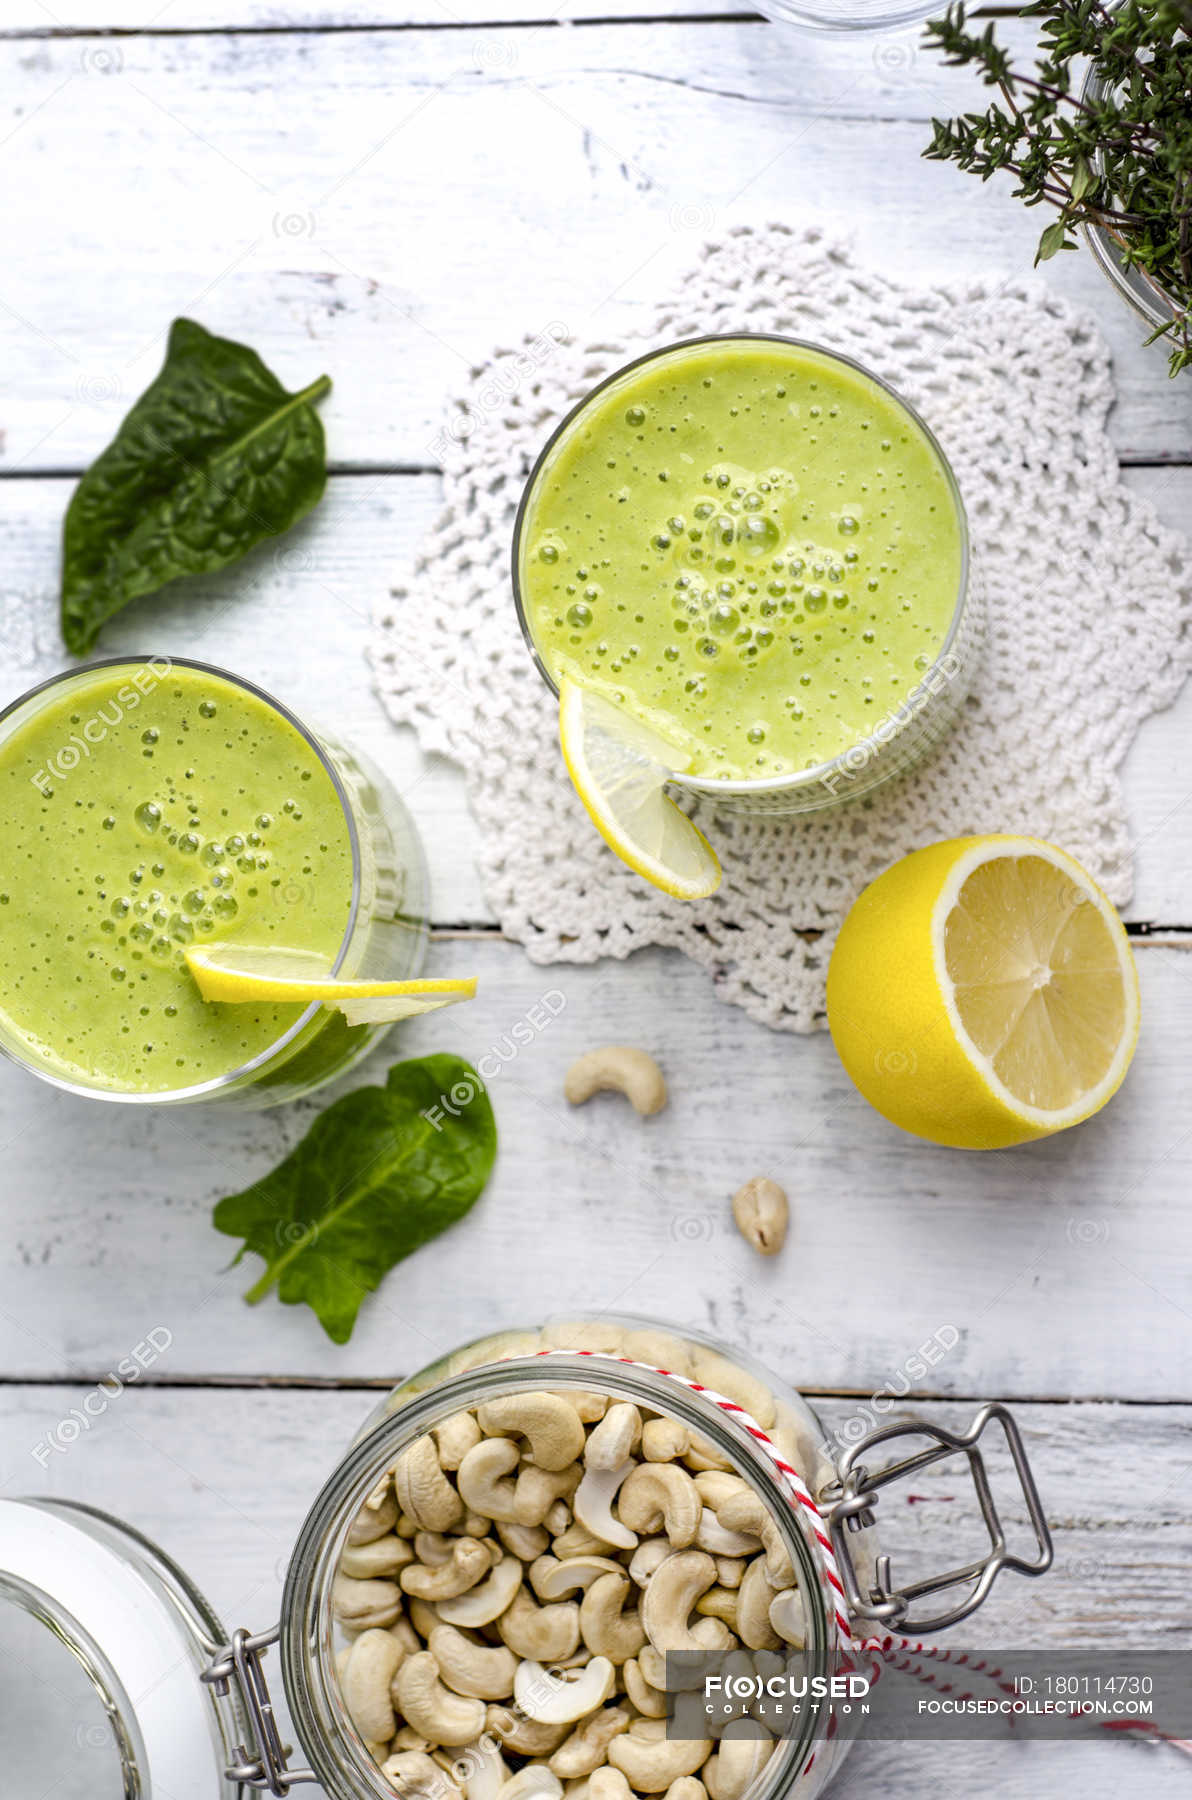 Two glasses of spinach smoothie, cashew nuts and half of lemon on white  wood — doily, ingredients - Stock Photo | #180114730